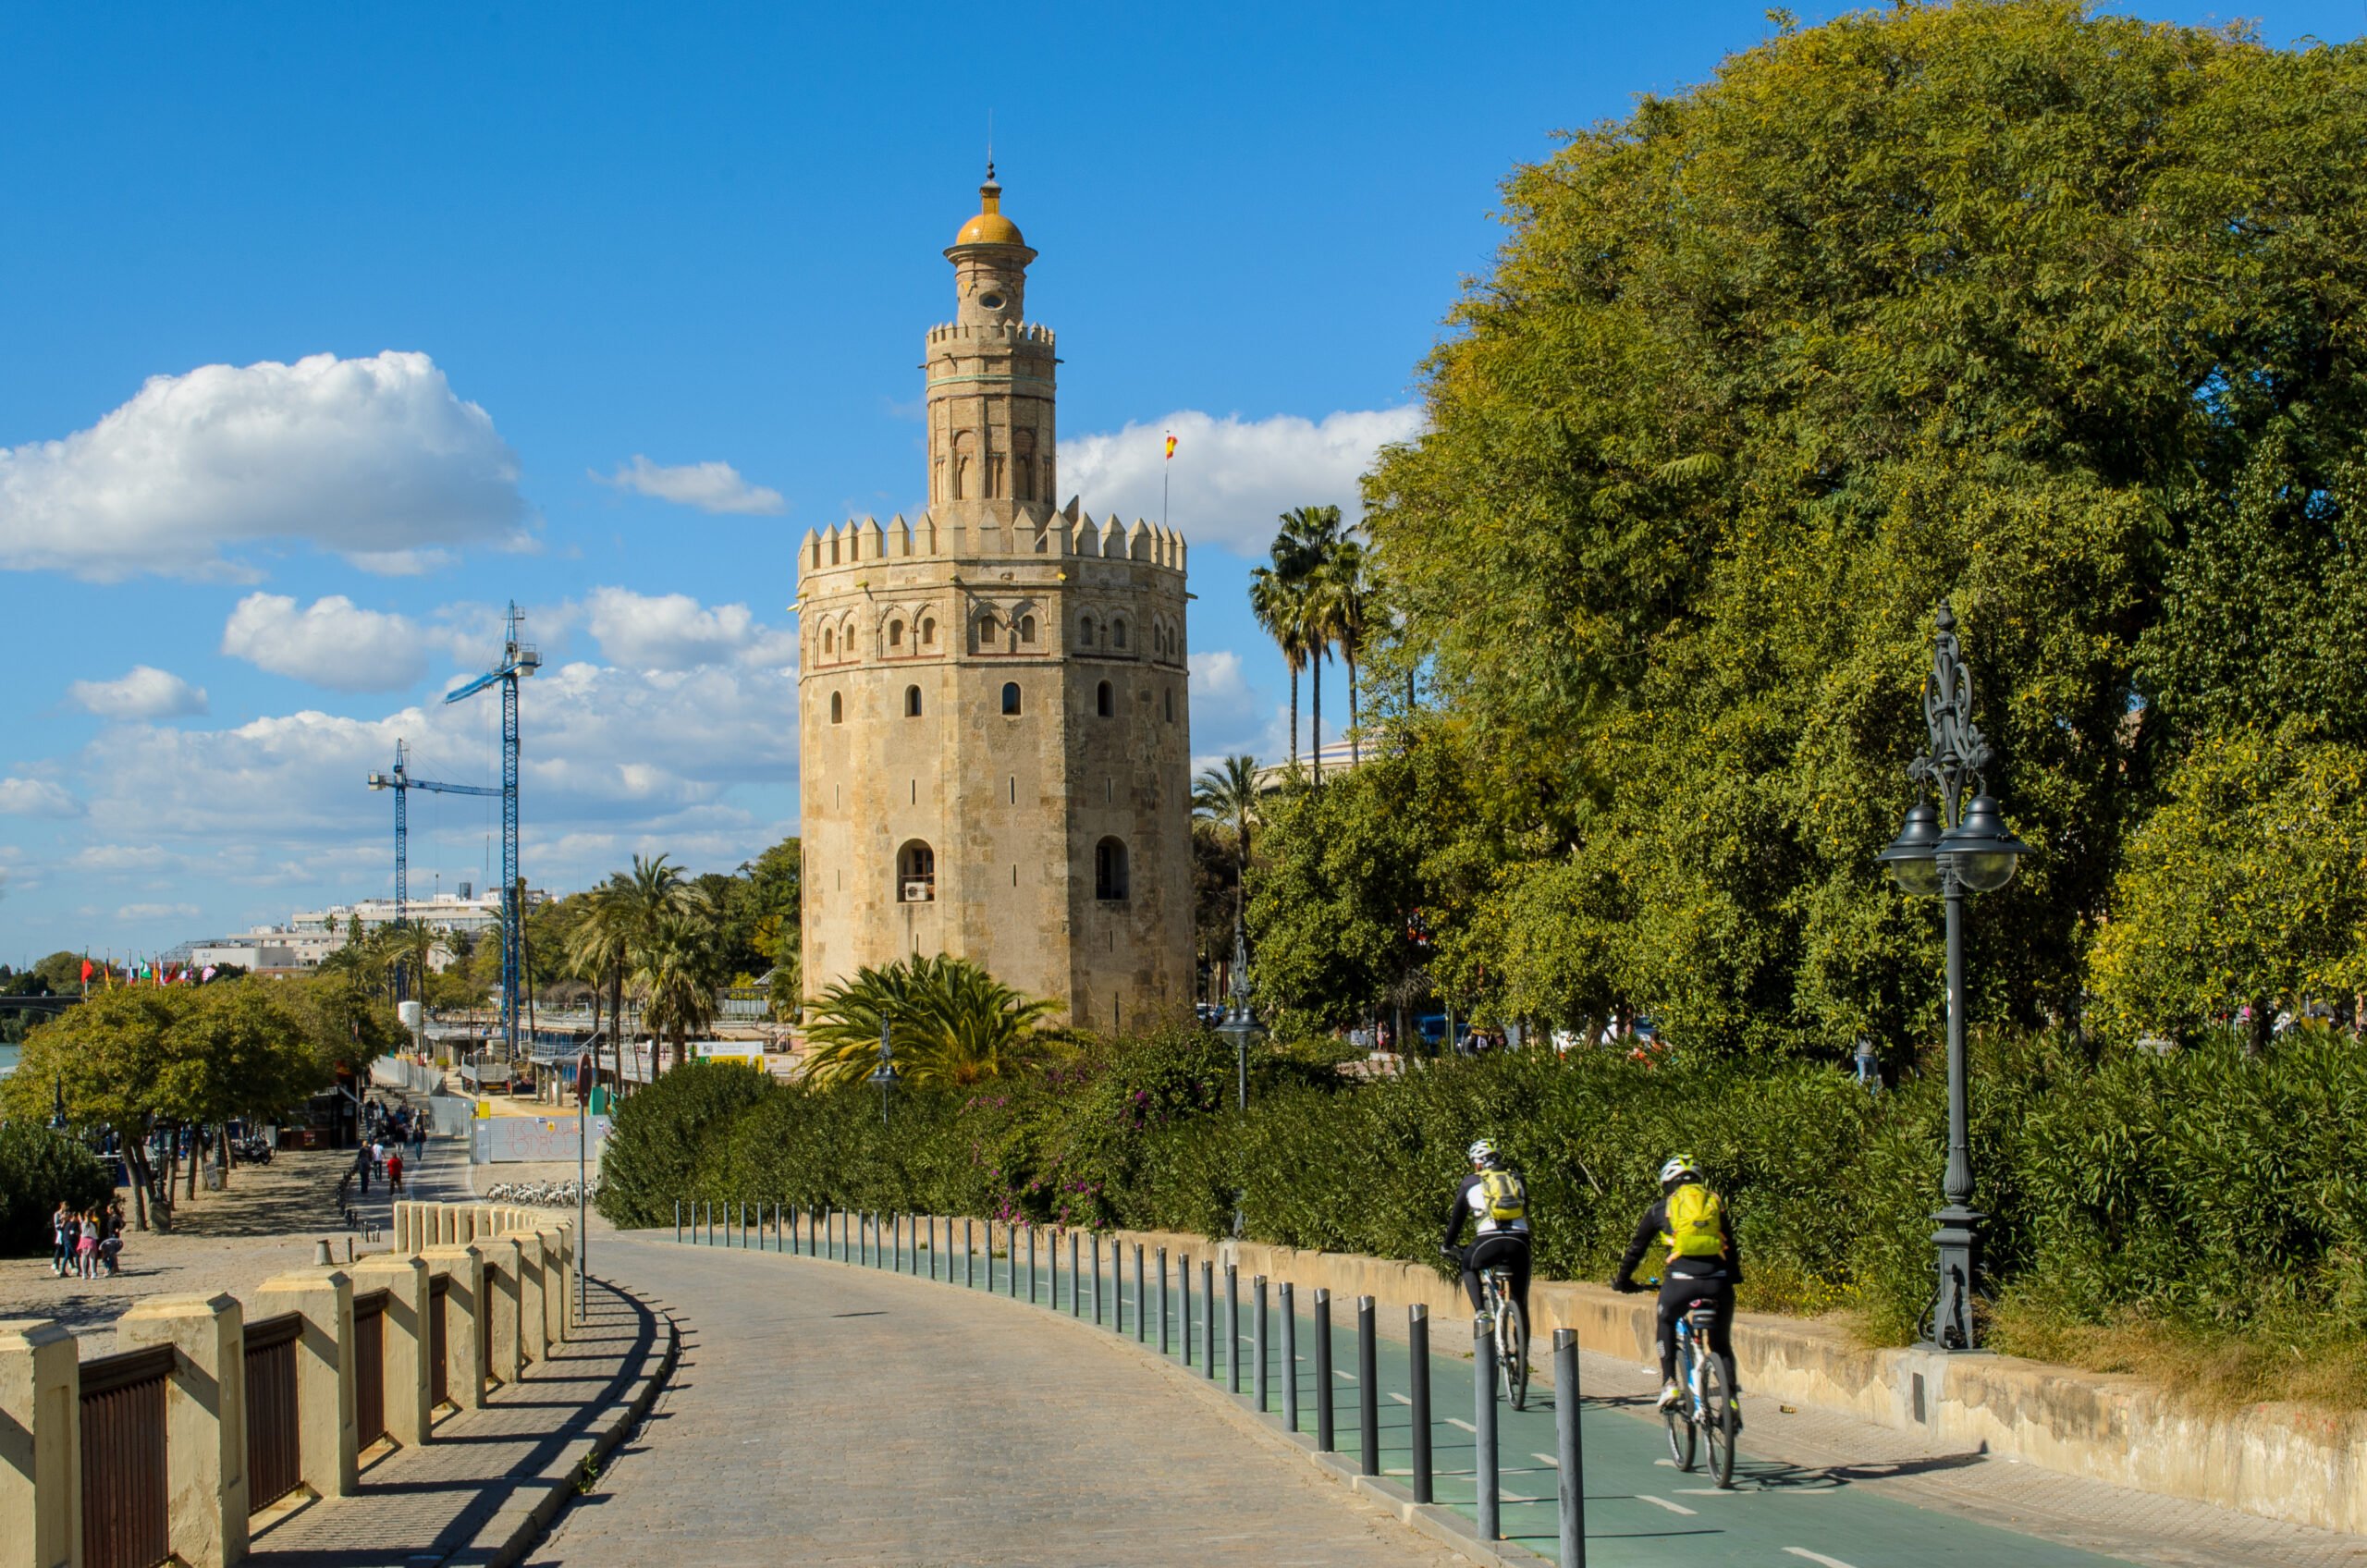 The Seville E Bike Tour Is A Great Tour To Learn More About The City!